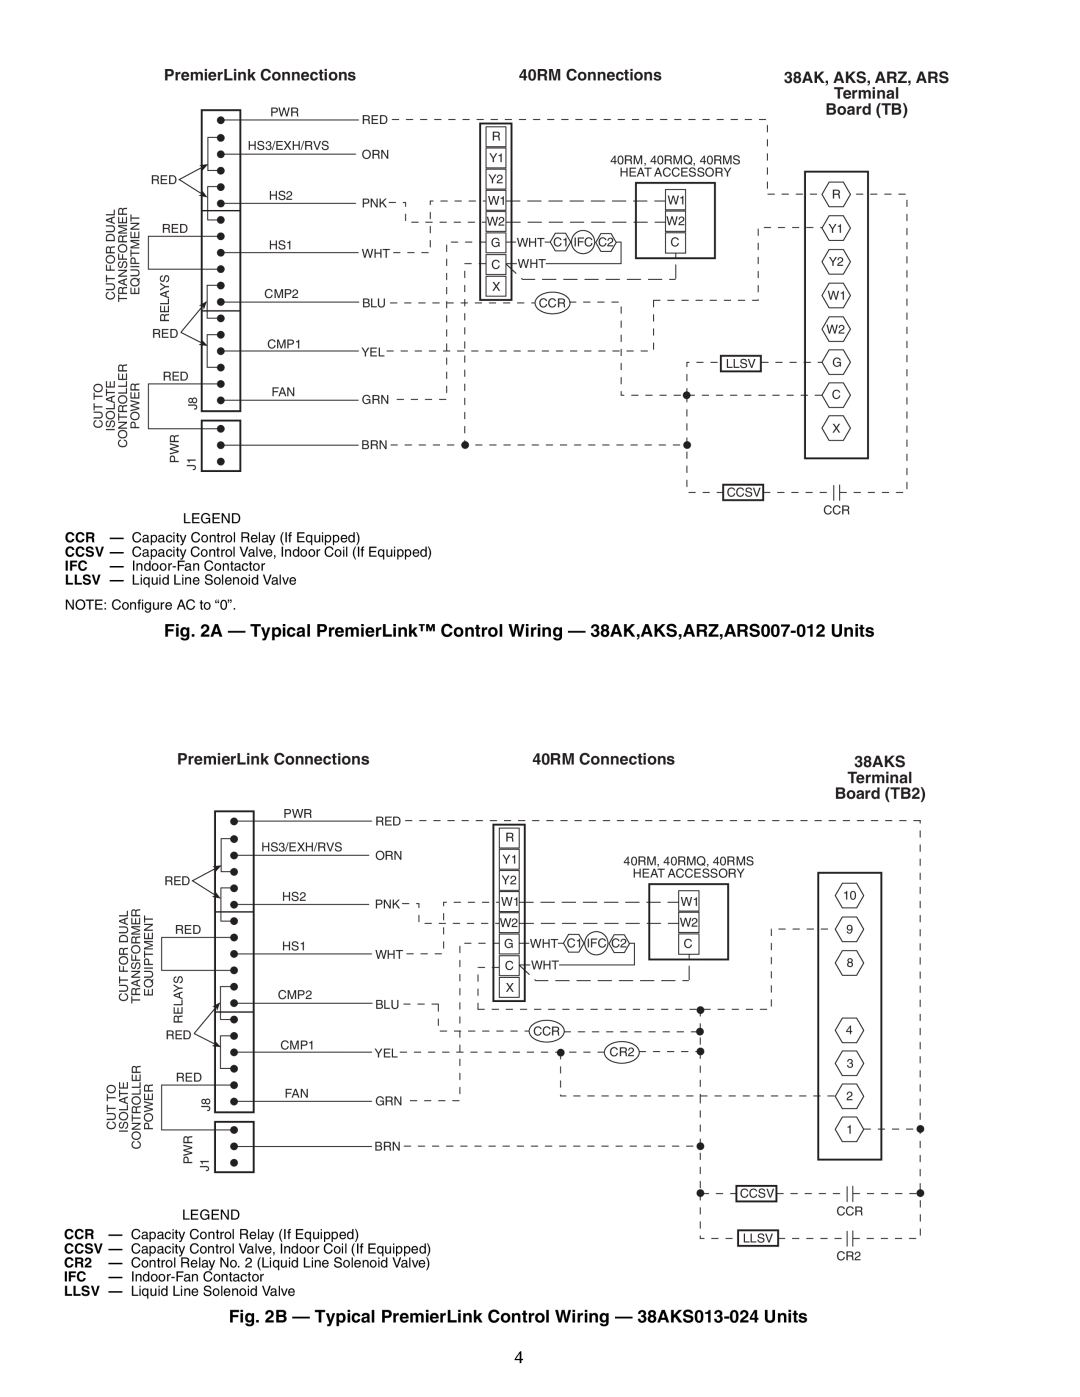 Carrier 33CSPREMLK specifications PremierLink Connections, 40RM Connections, 38AK, AKS, ARZ, ARS Terminal, Board TB 